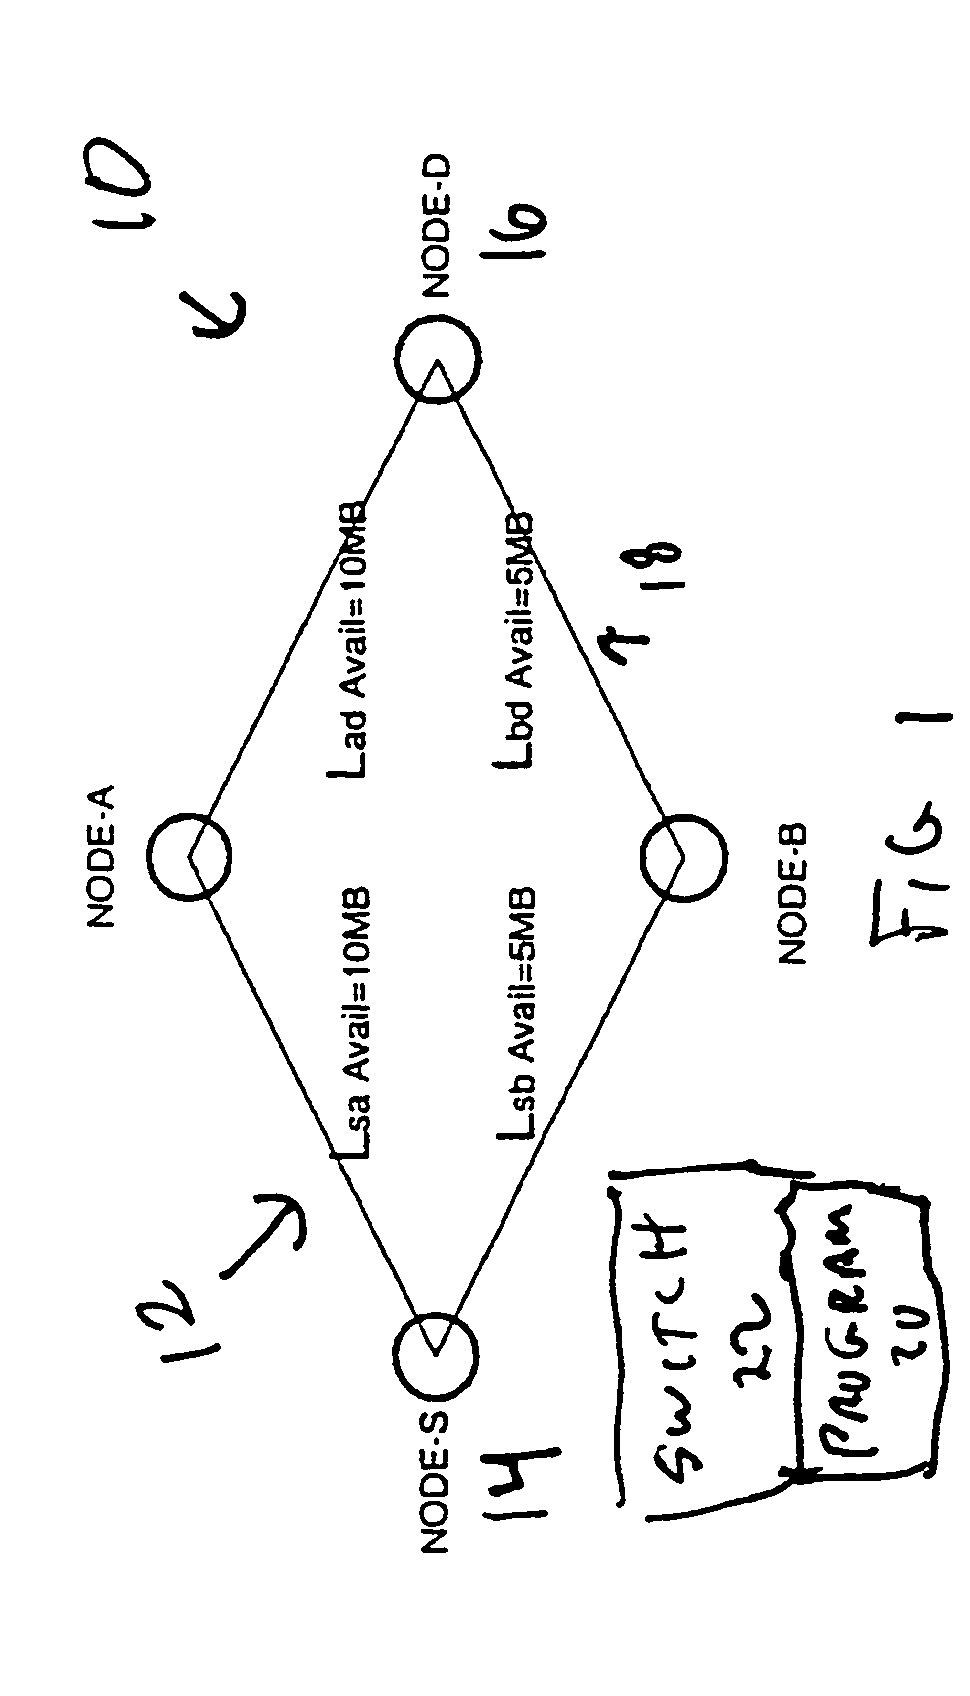 Method and apparatus for selecting a preferred LSP path from a set of equal cost paths